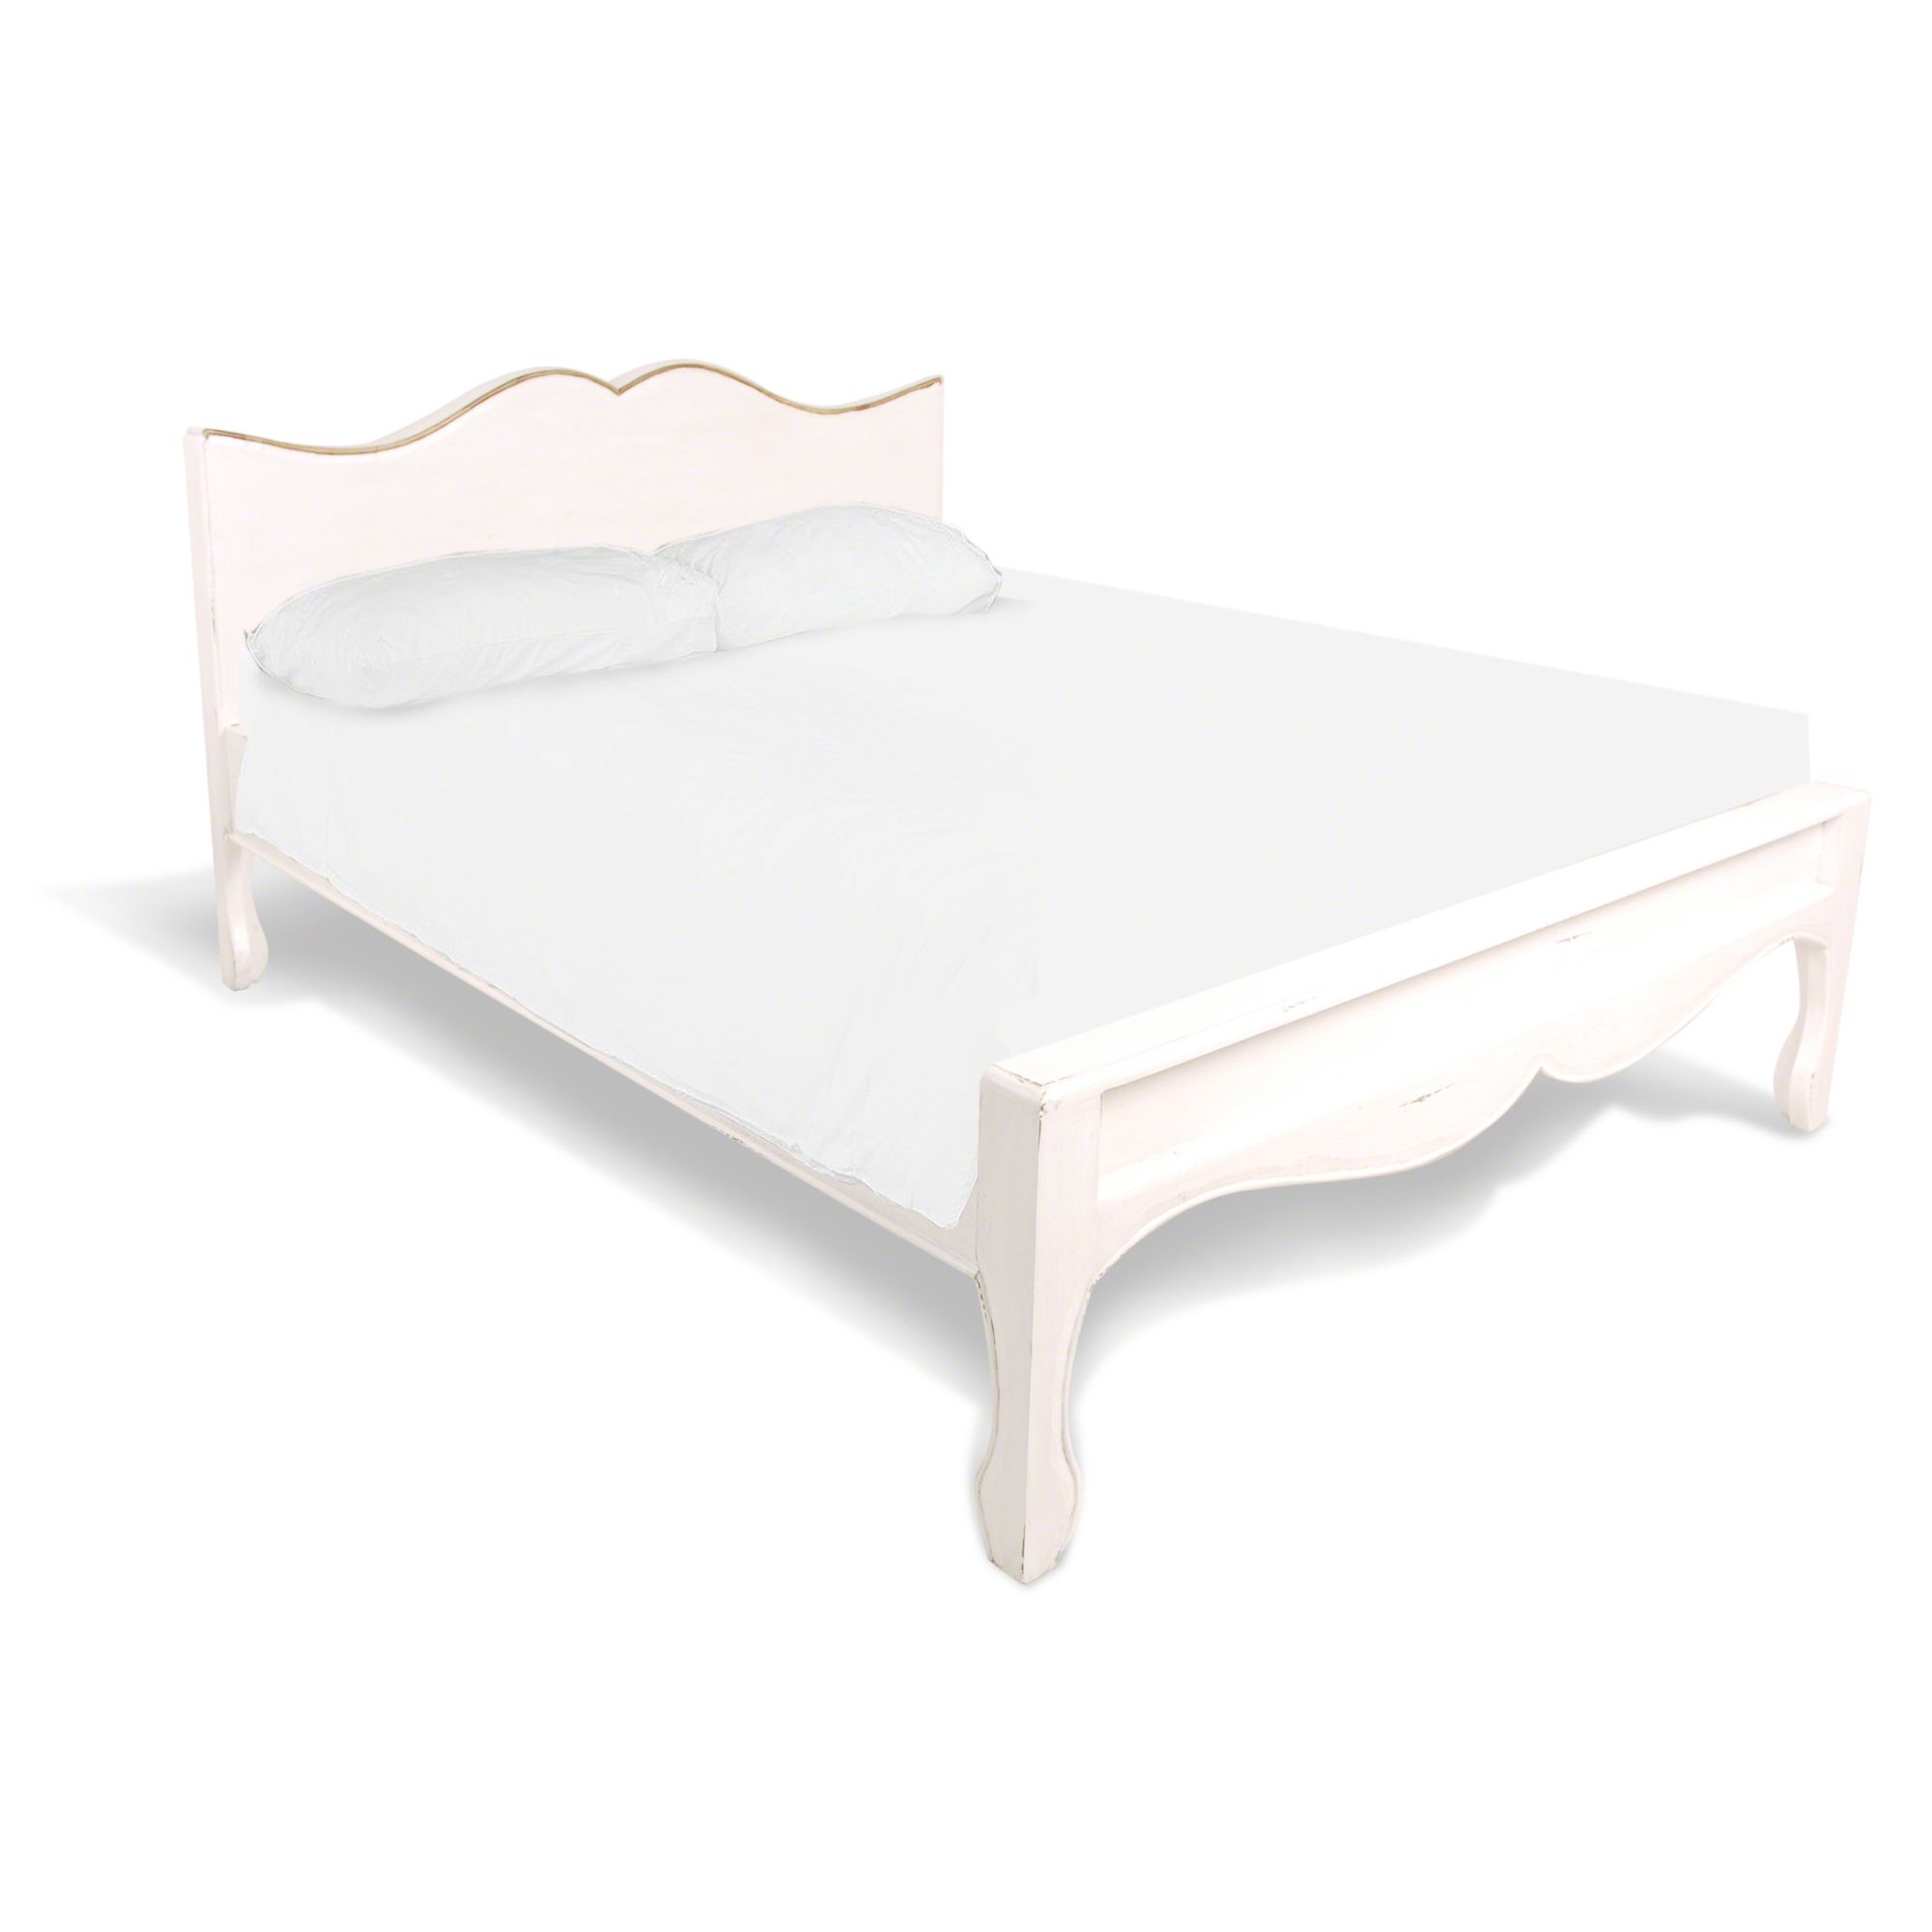 Oceans Apart Painted Provence Babette King Bed Frame in Antique White at Tesco Direct